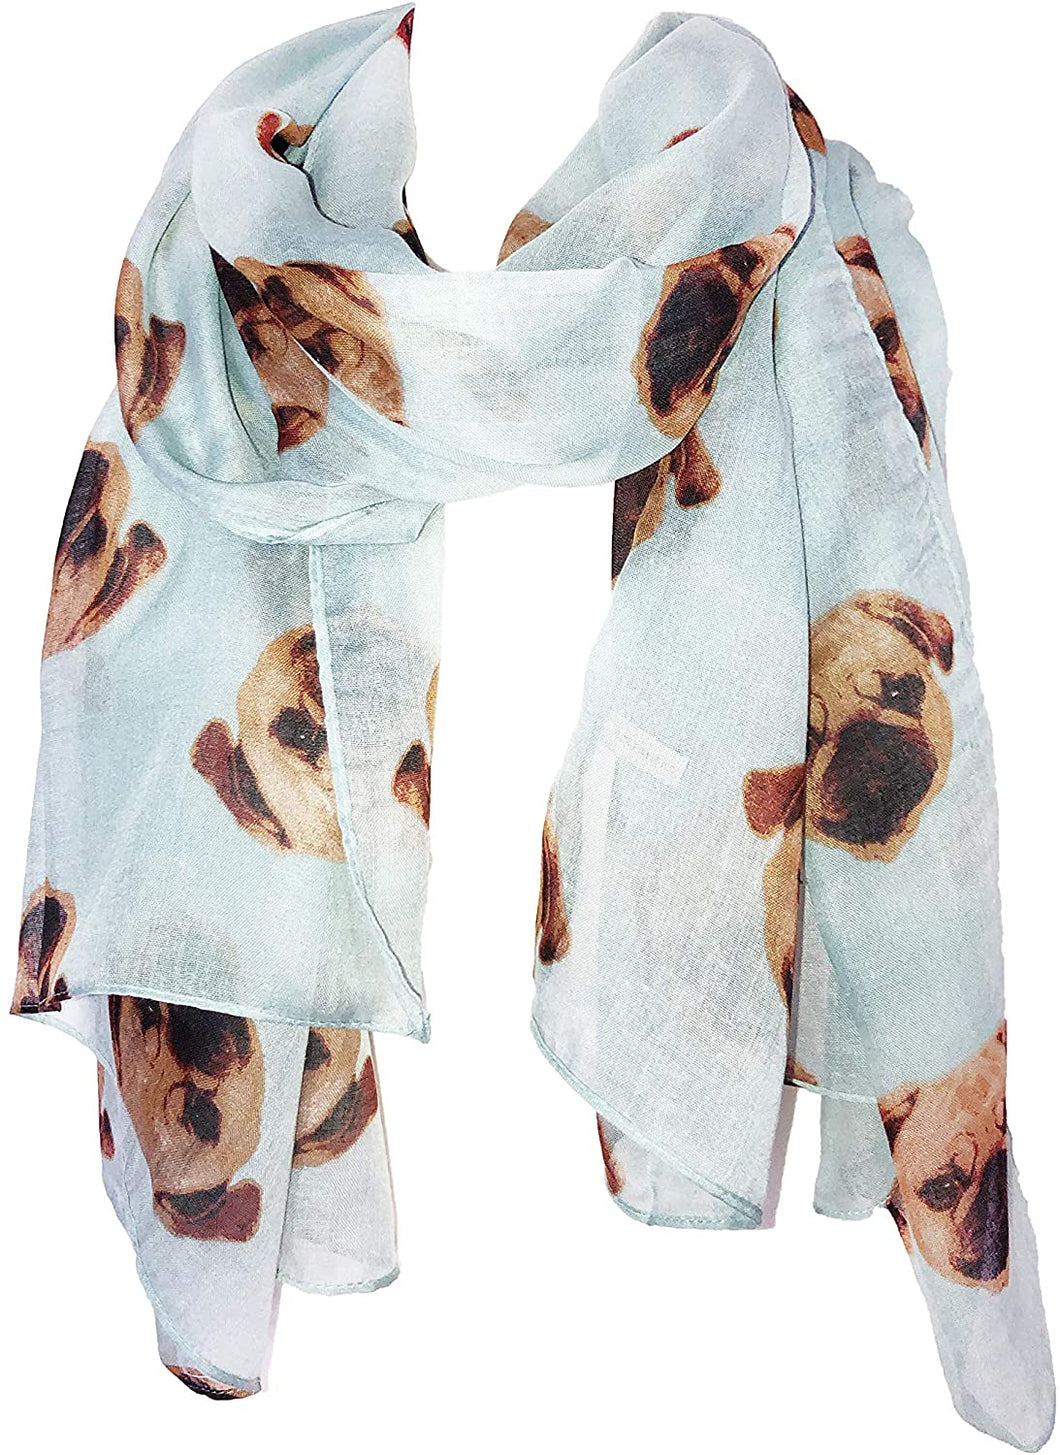 Pamper Yourself Now Green Pug Scarf Great for Presents/Gifts.